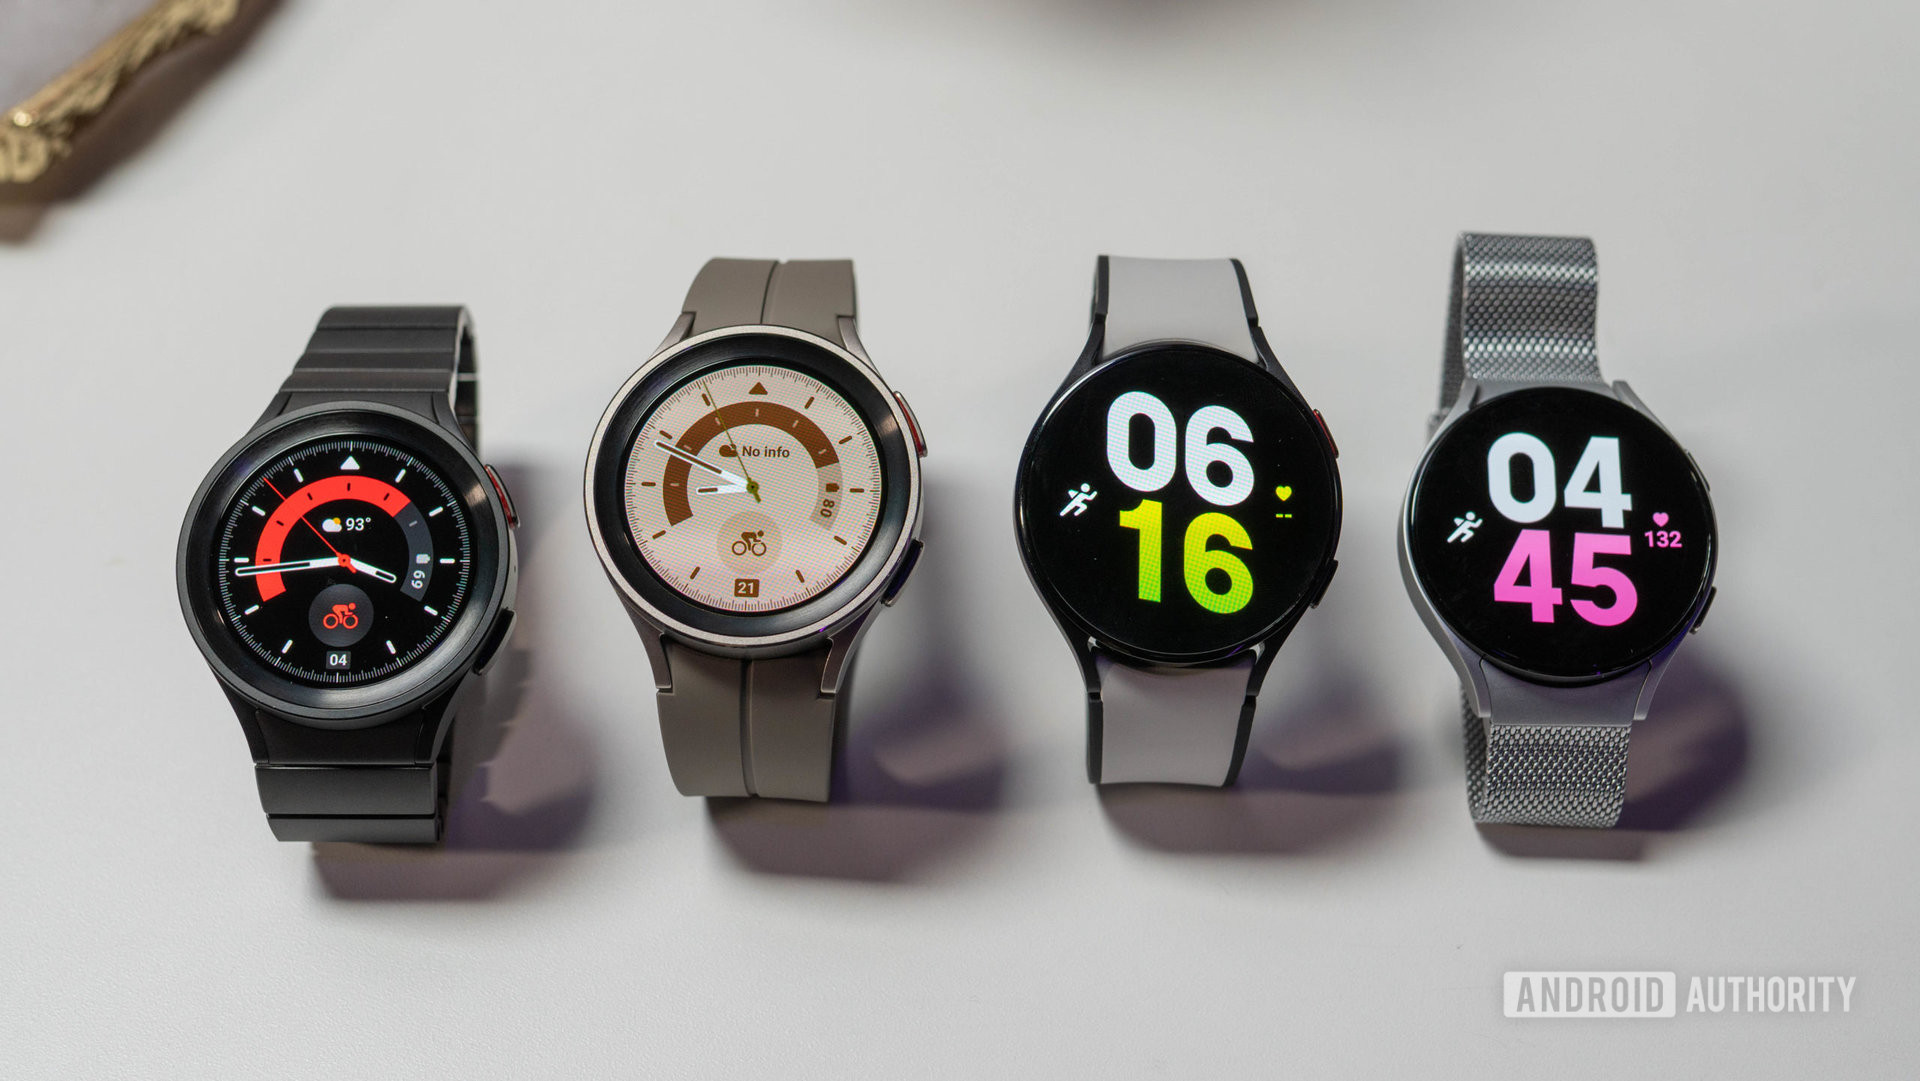 Samsung Galaxy Watch 5 Pro and Samsung Galaxy Watch 5 models on a table in various colors